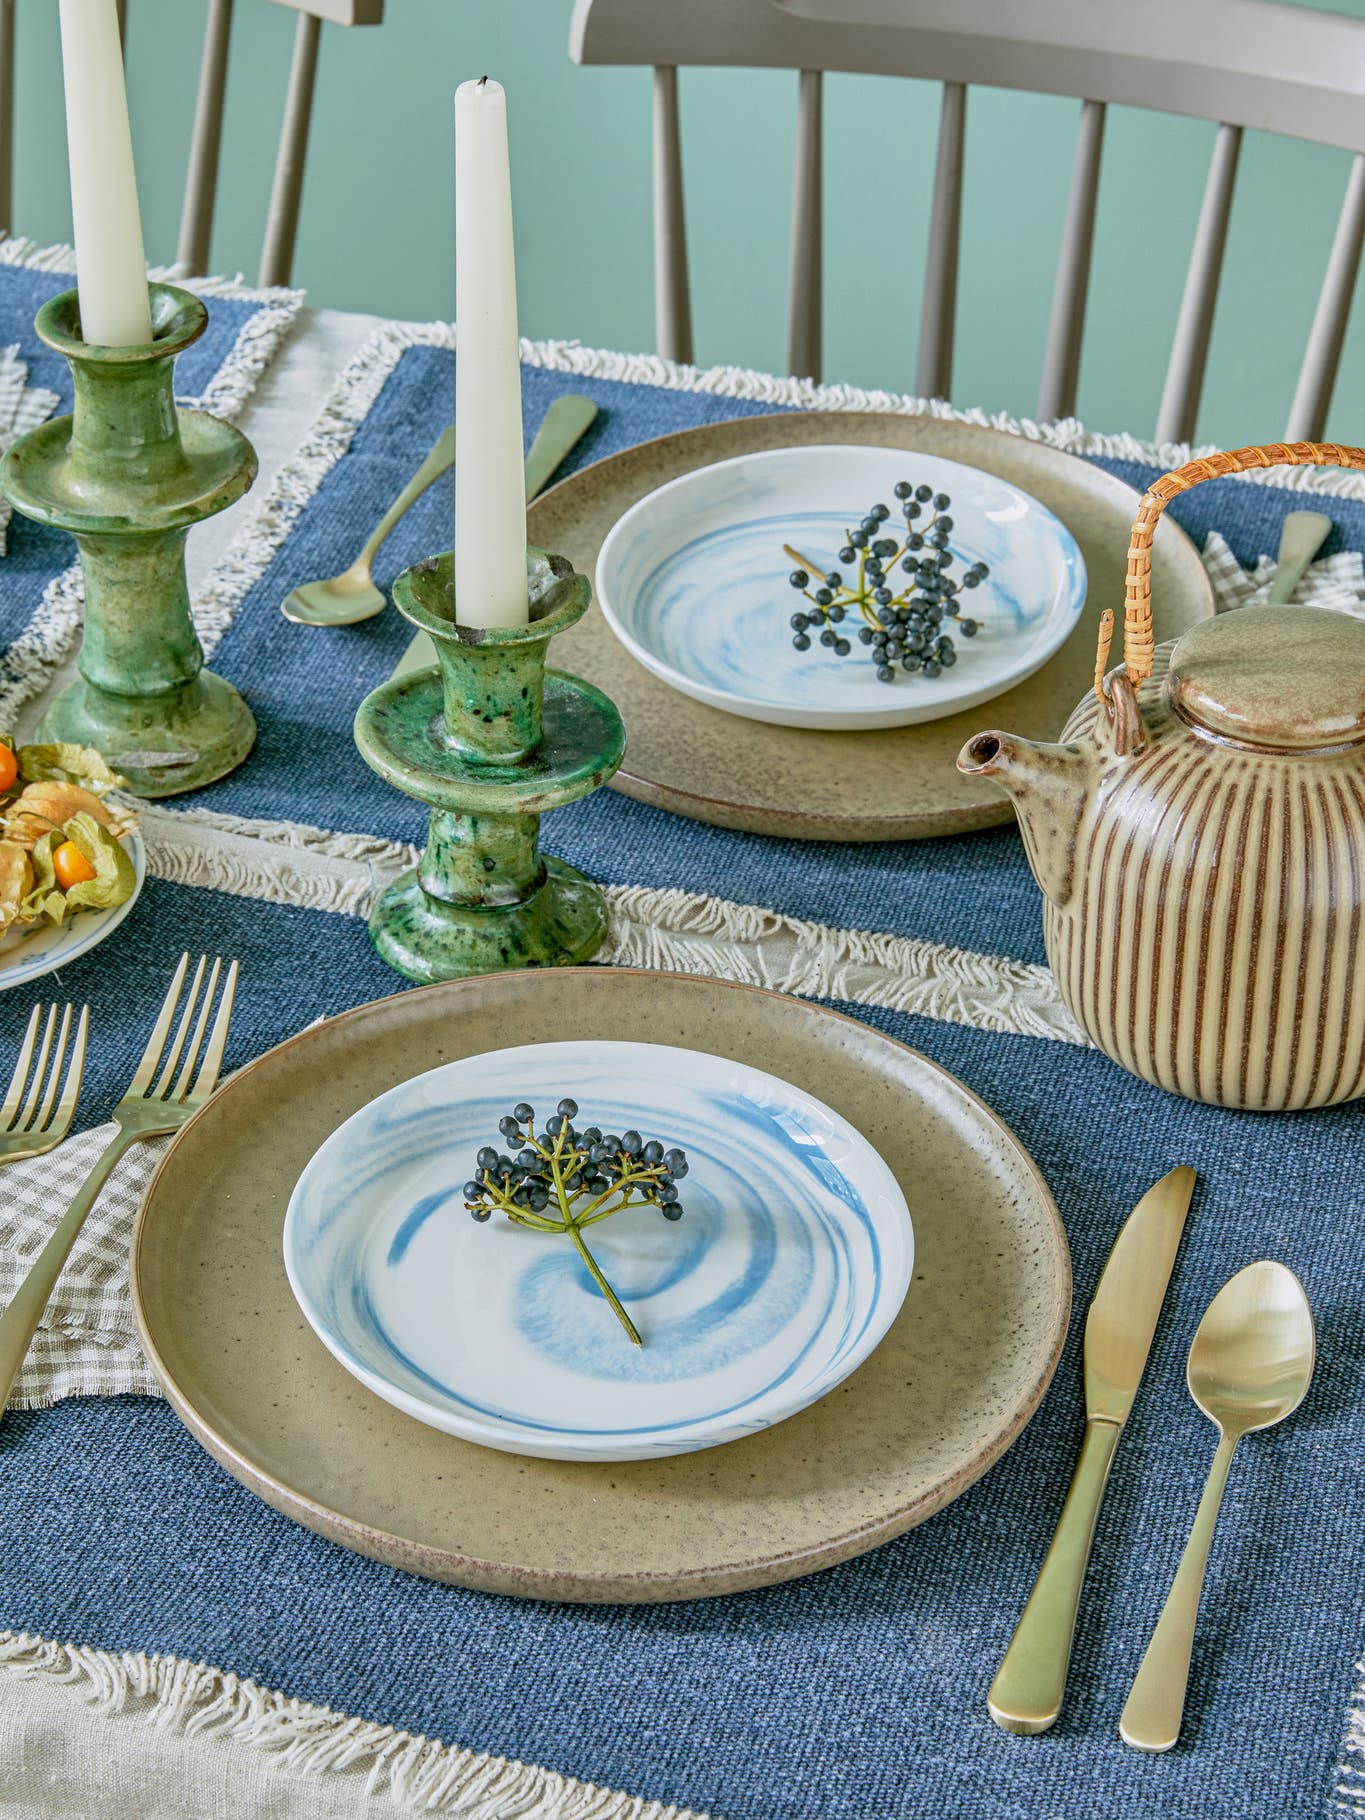 California Beaches Inspired Our Associate Style Editor’s Holiday Table